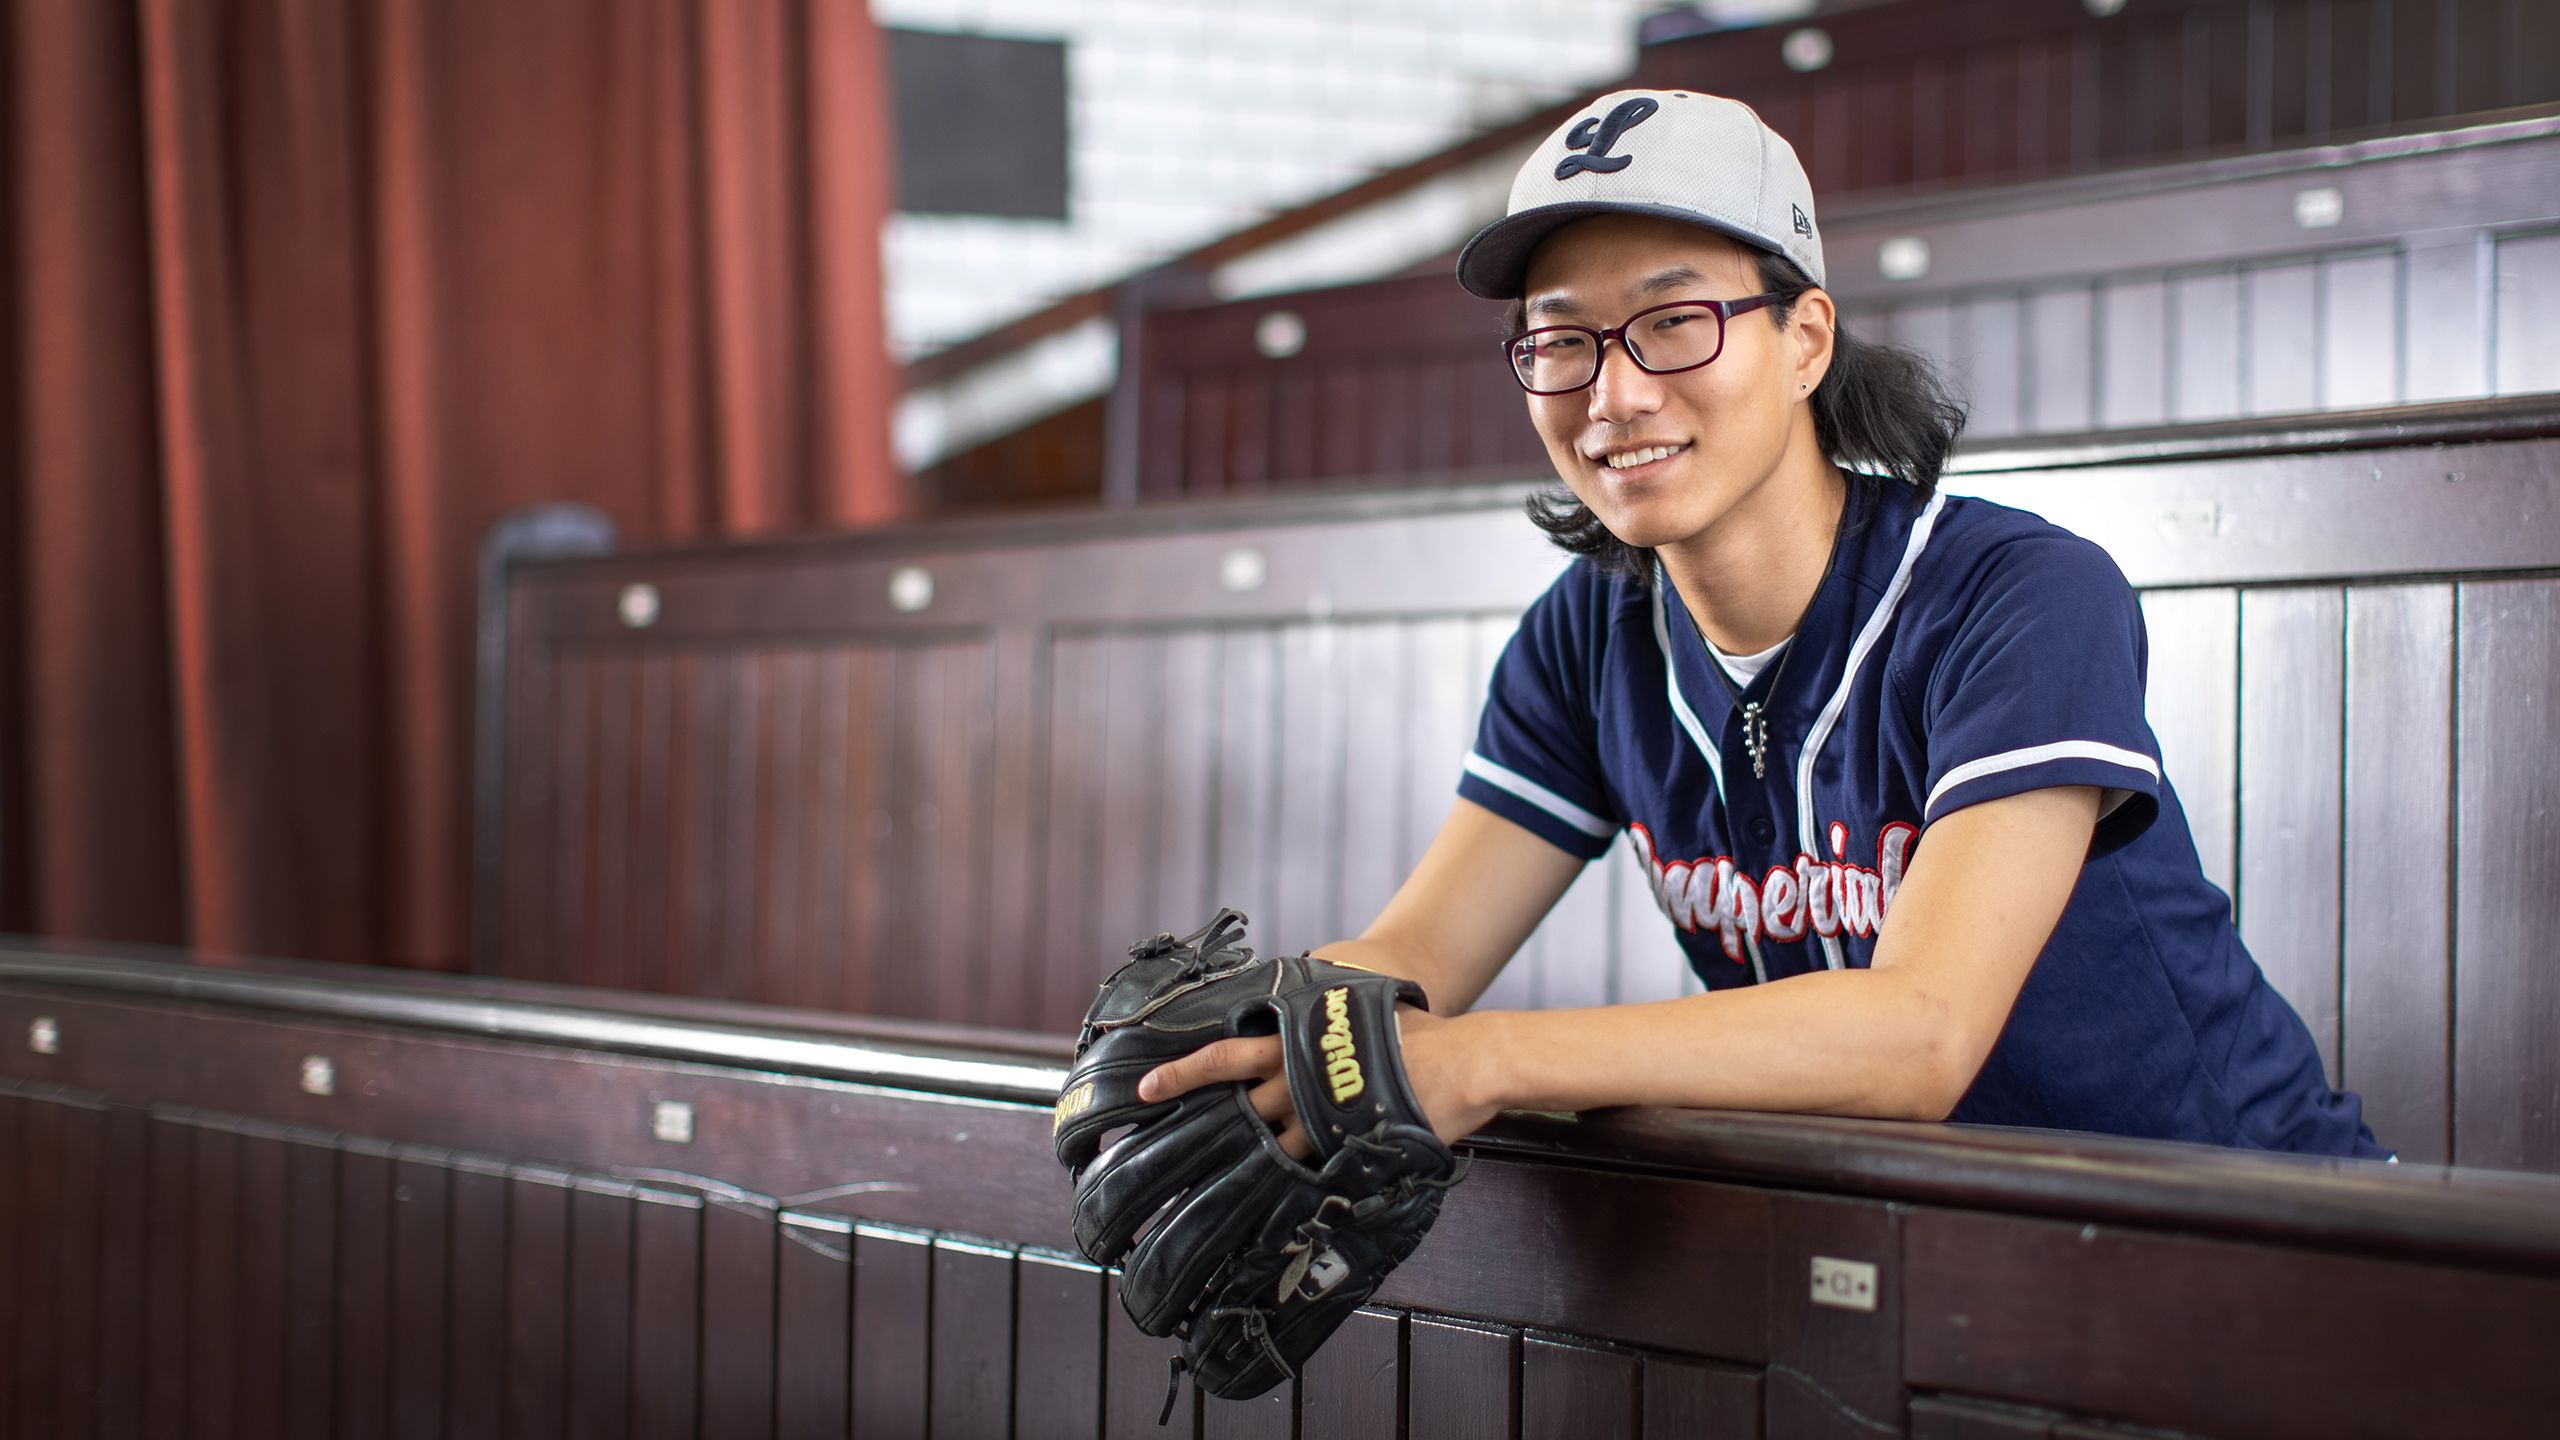 Ben Shin sits in lecture theatre wearing baseball outfit (hat and gloves) and smiles at the camera